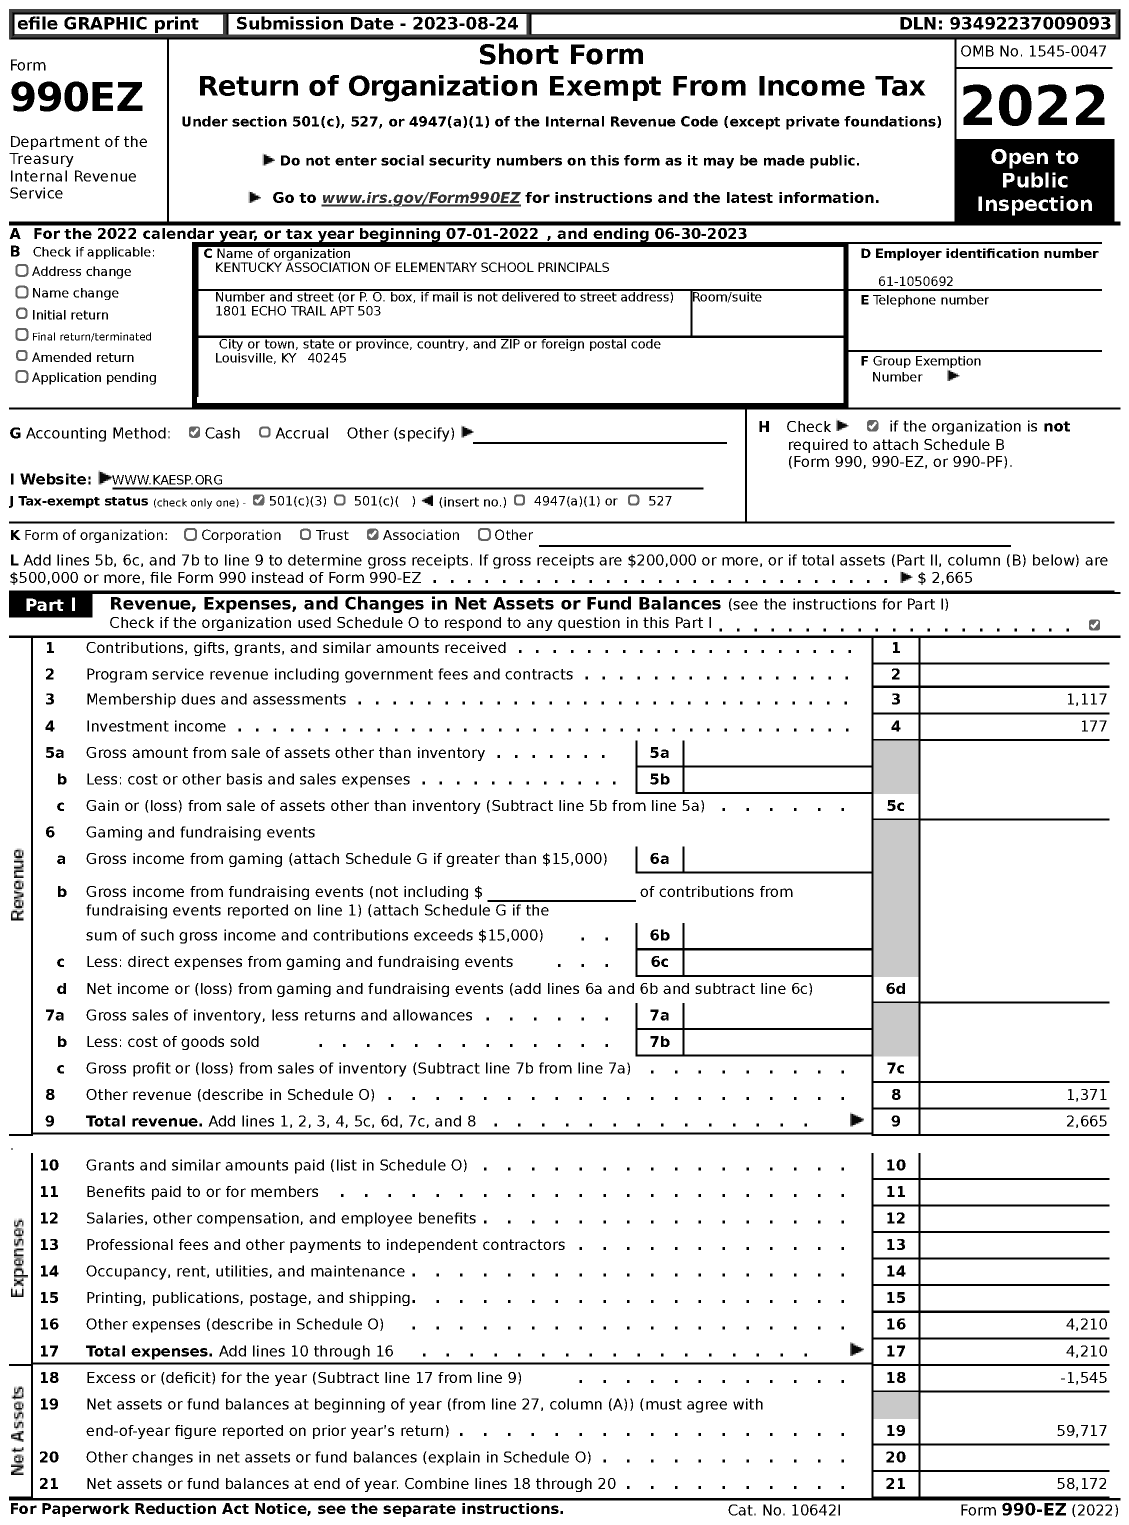 Image of first page of 2022 Form 990EZ for Kentucky Association of Elementary School Principals